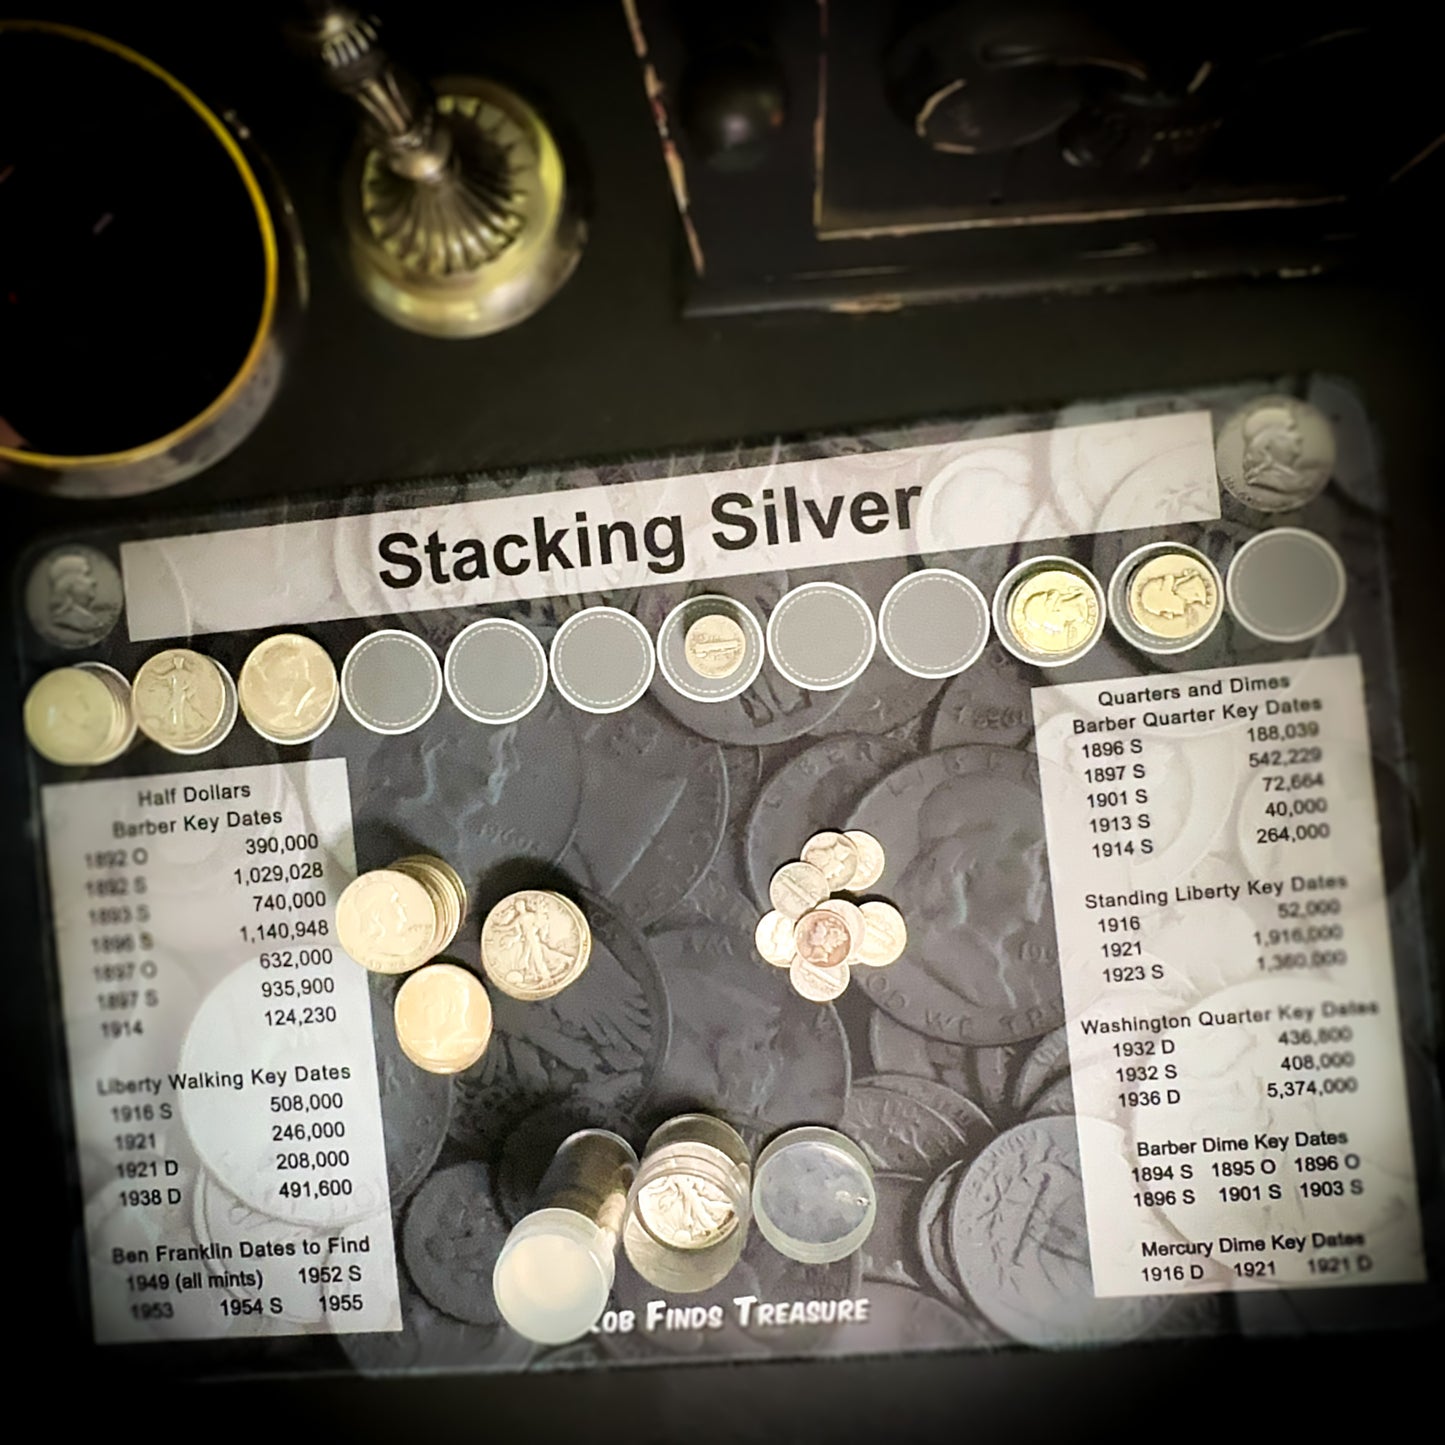 Layout with coins of a Stacking Silver coin roll hunting mat made by Rob Finds Treasure featuring organized rows for stacking silver finds, providing a convenient and systematic setup for searching through coins 